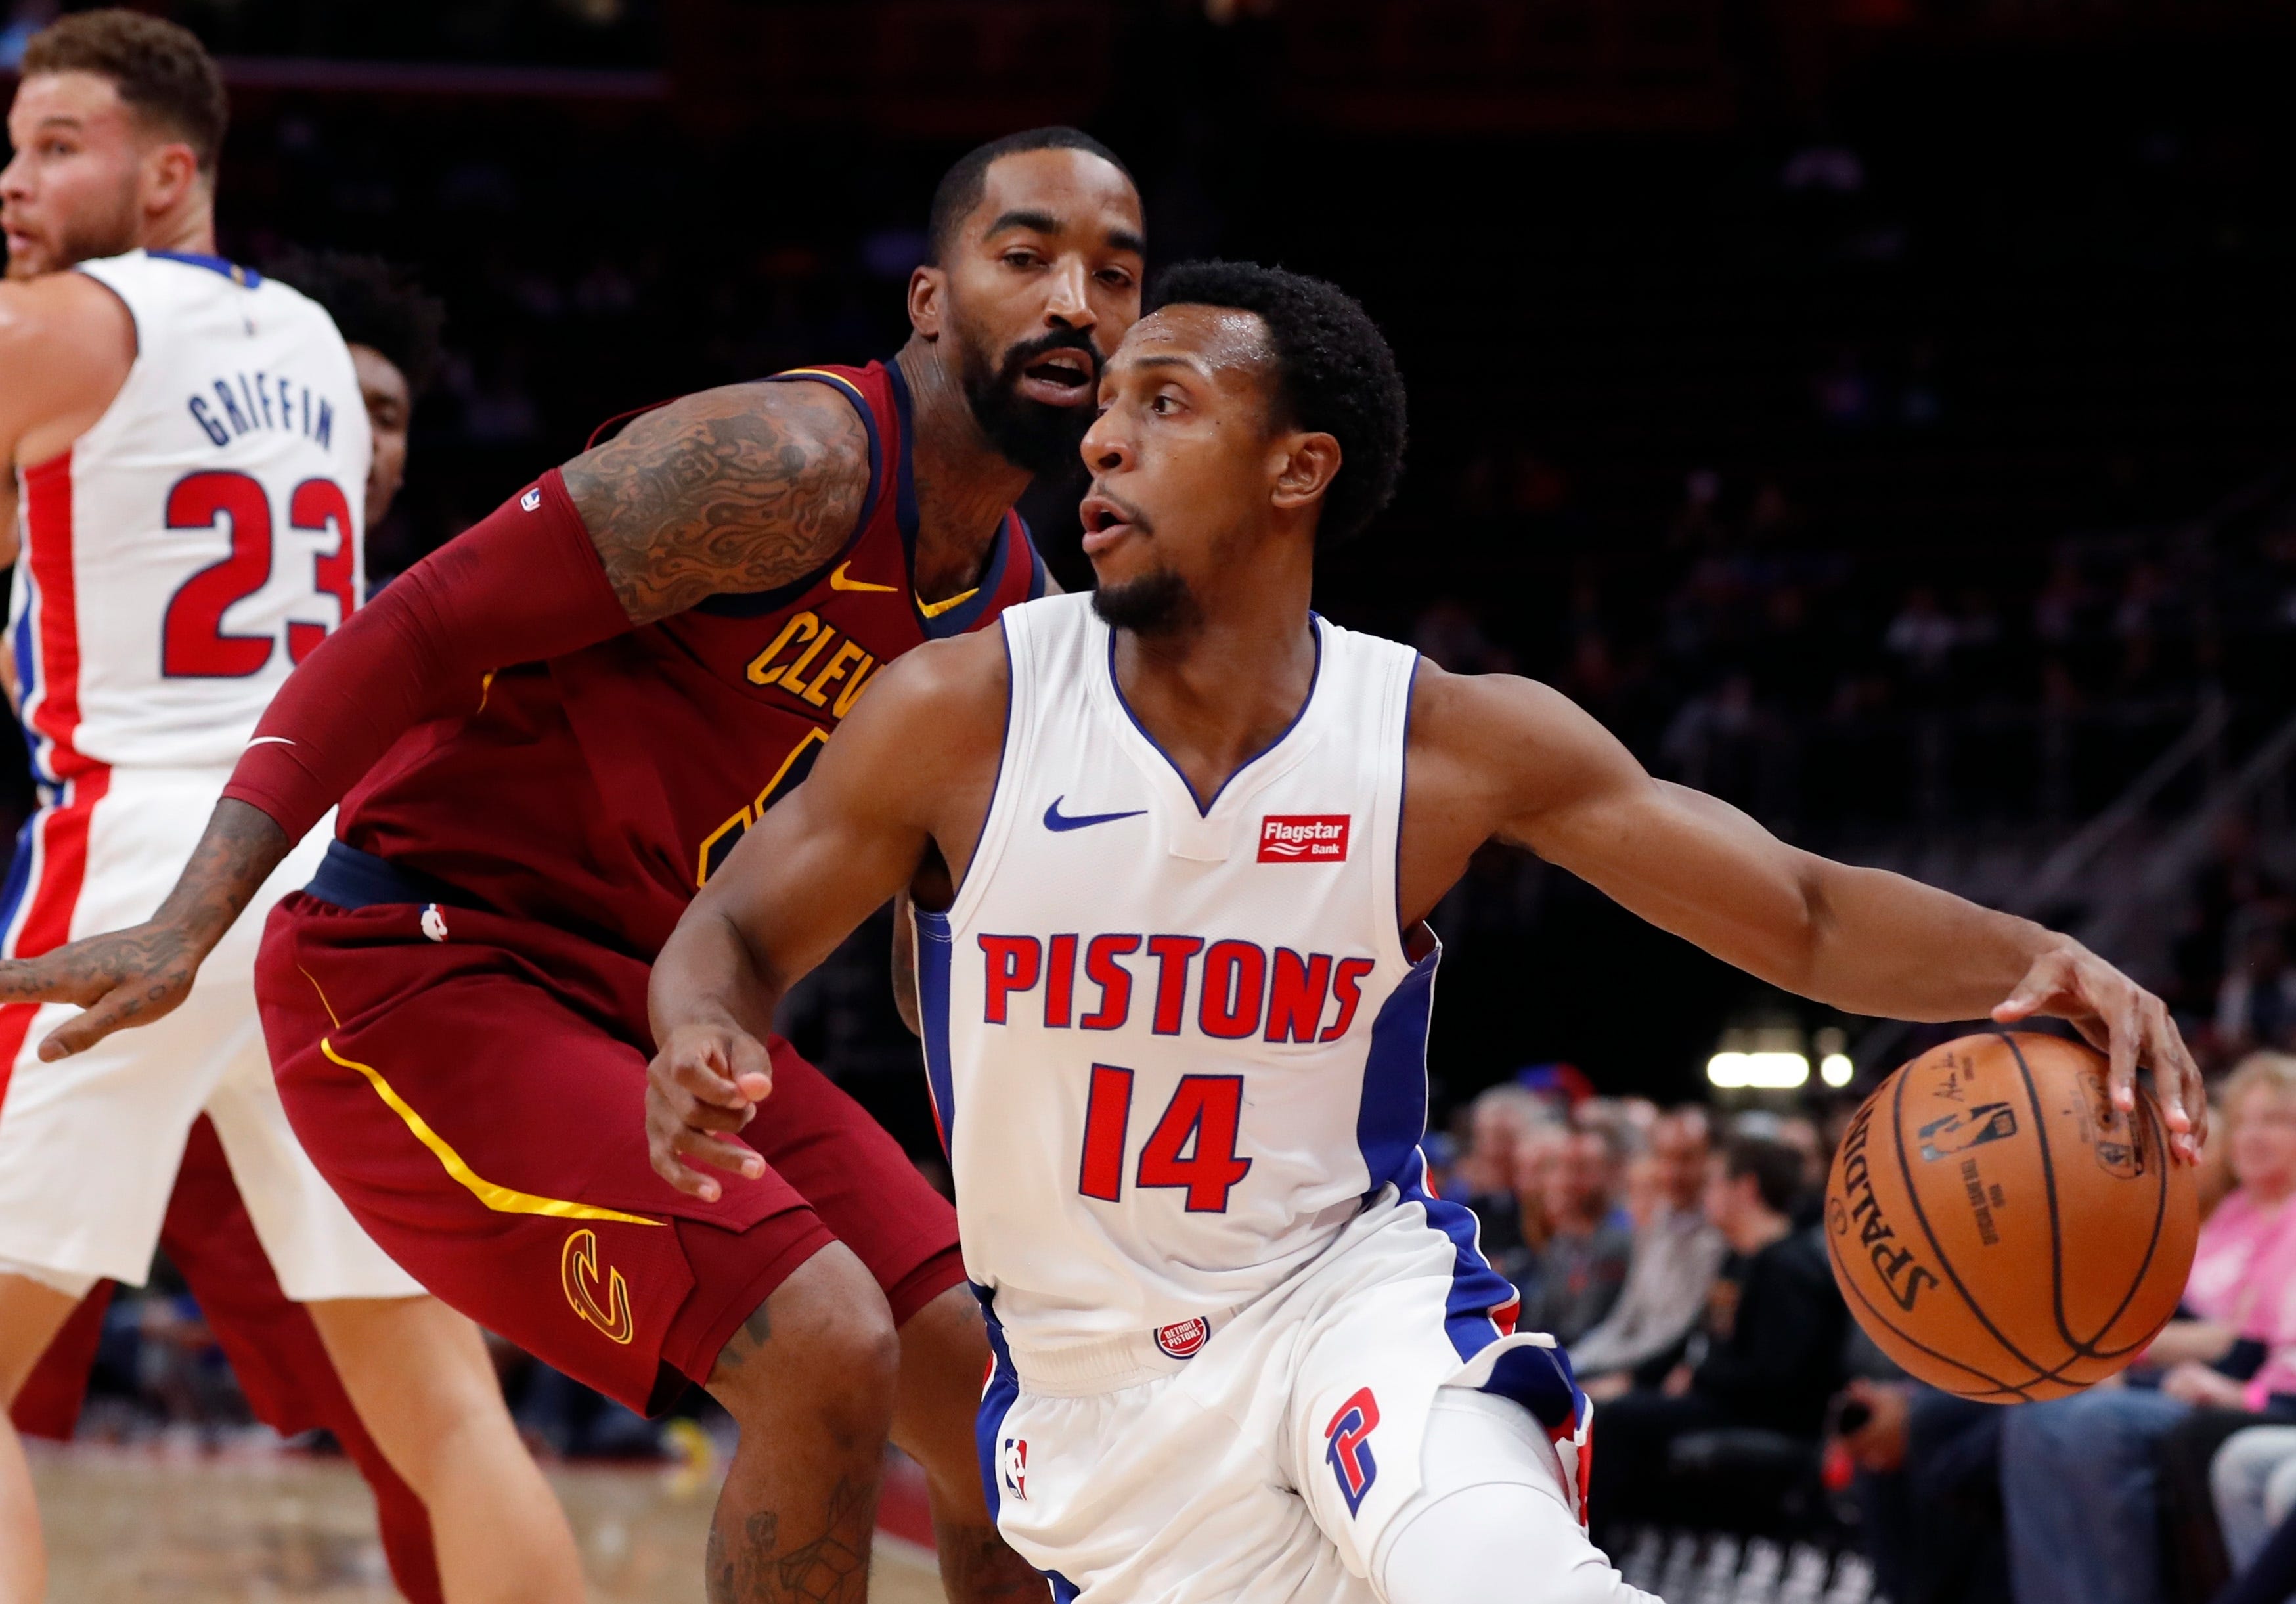 Detroit Pistons guard Ish Smith (14) drives on Cleveland Cavaliers guard JR Smith during the first half of an NBA basketball game, Thursday, Oct. 25, 2018, in Detroit.